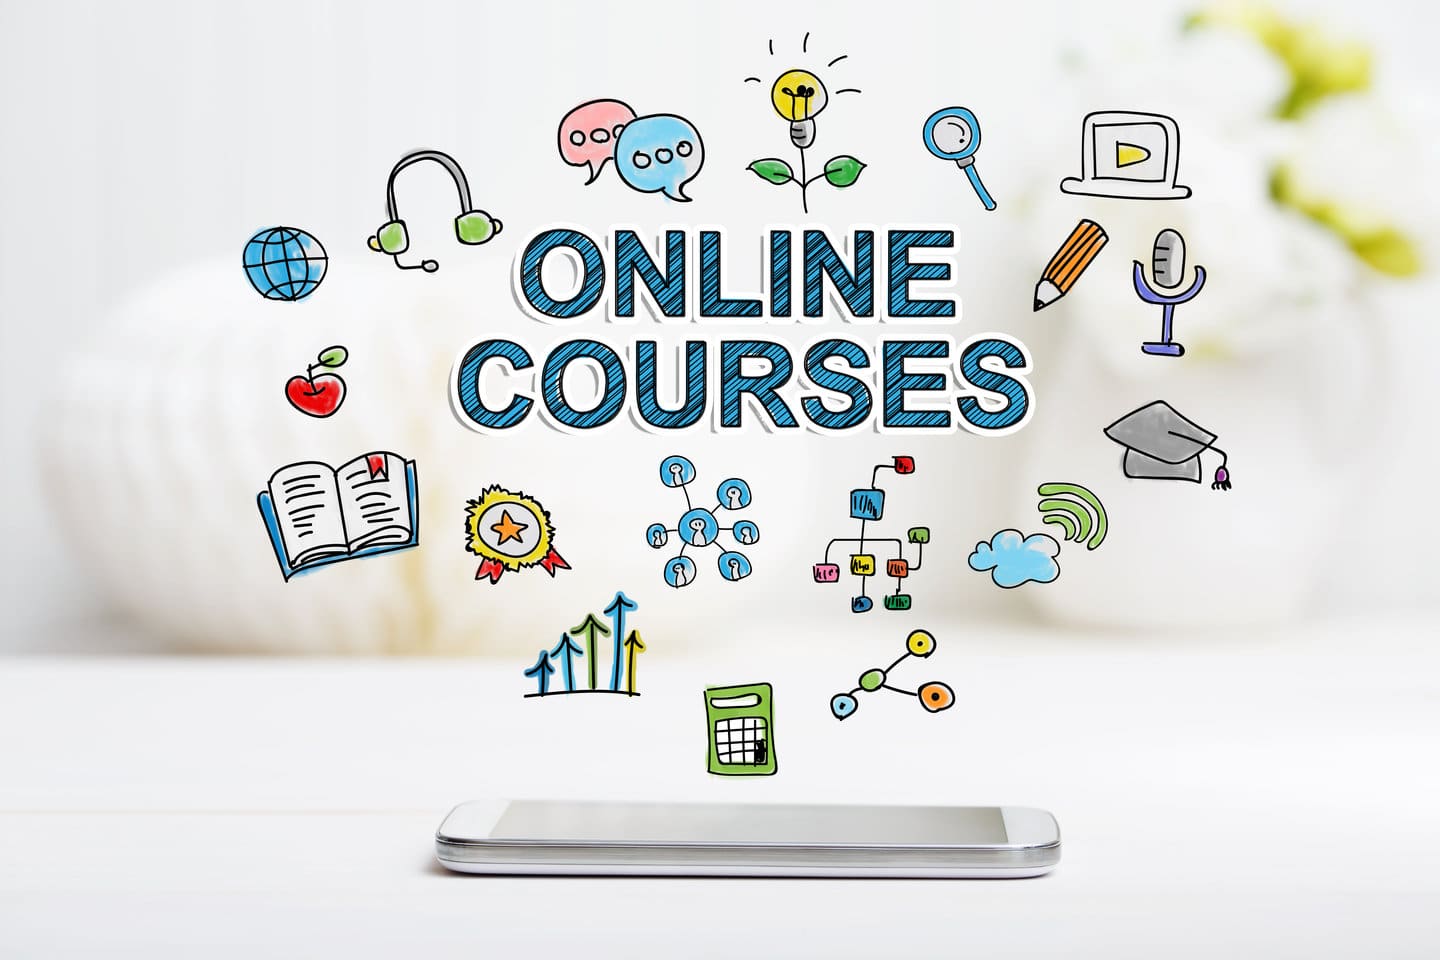 Online courses provide useful resources for freelancers